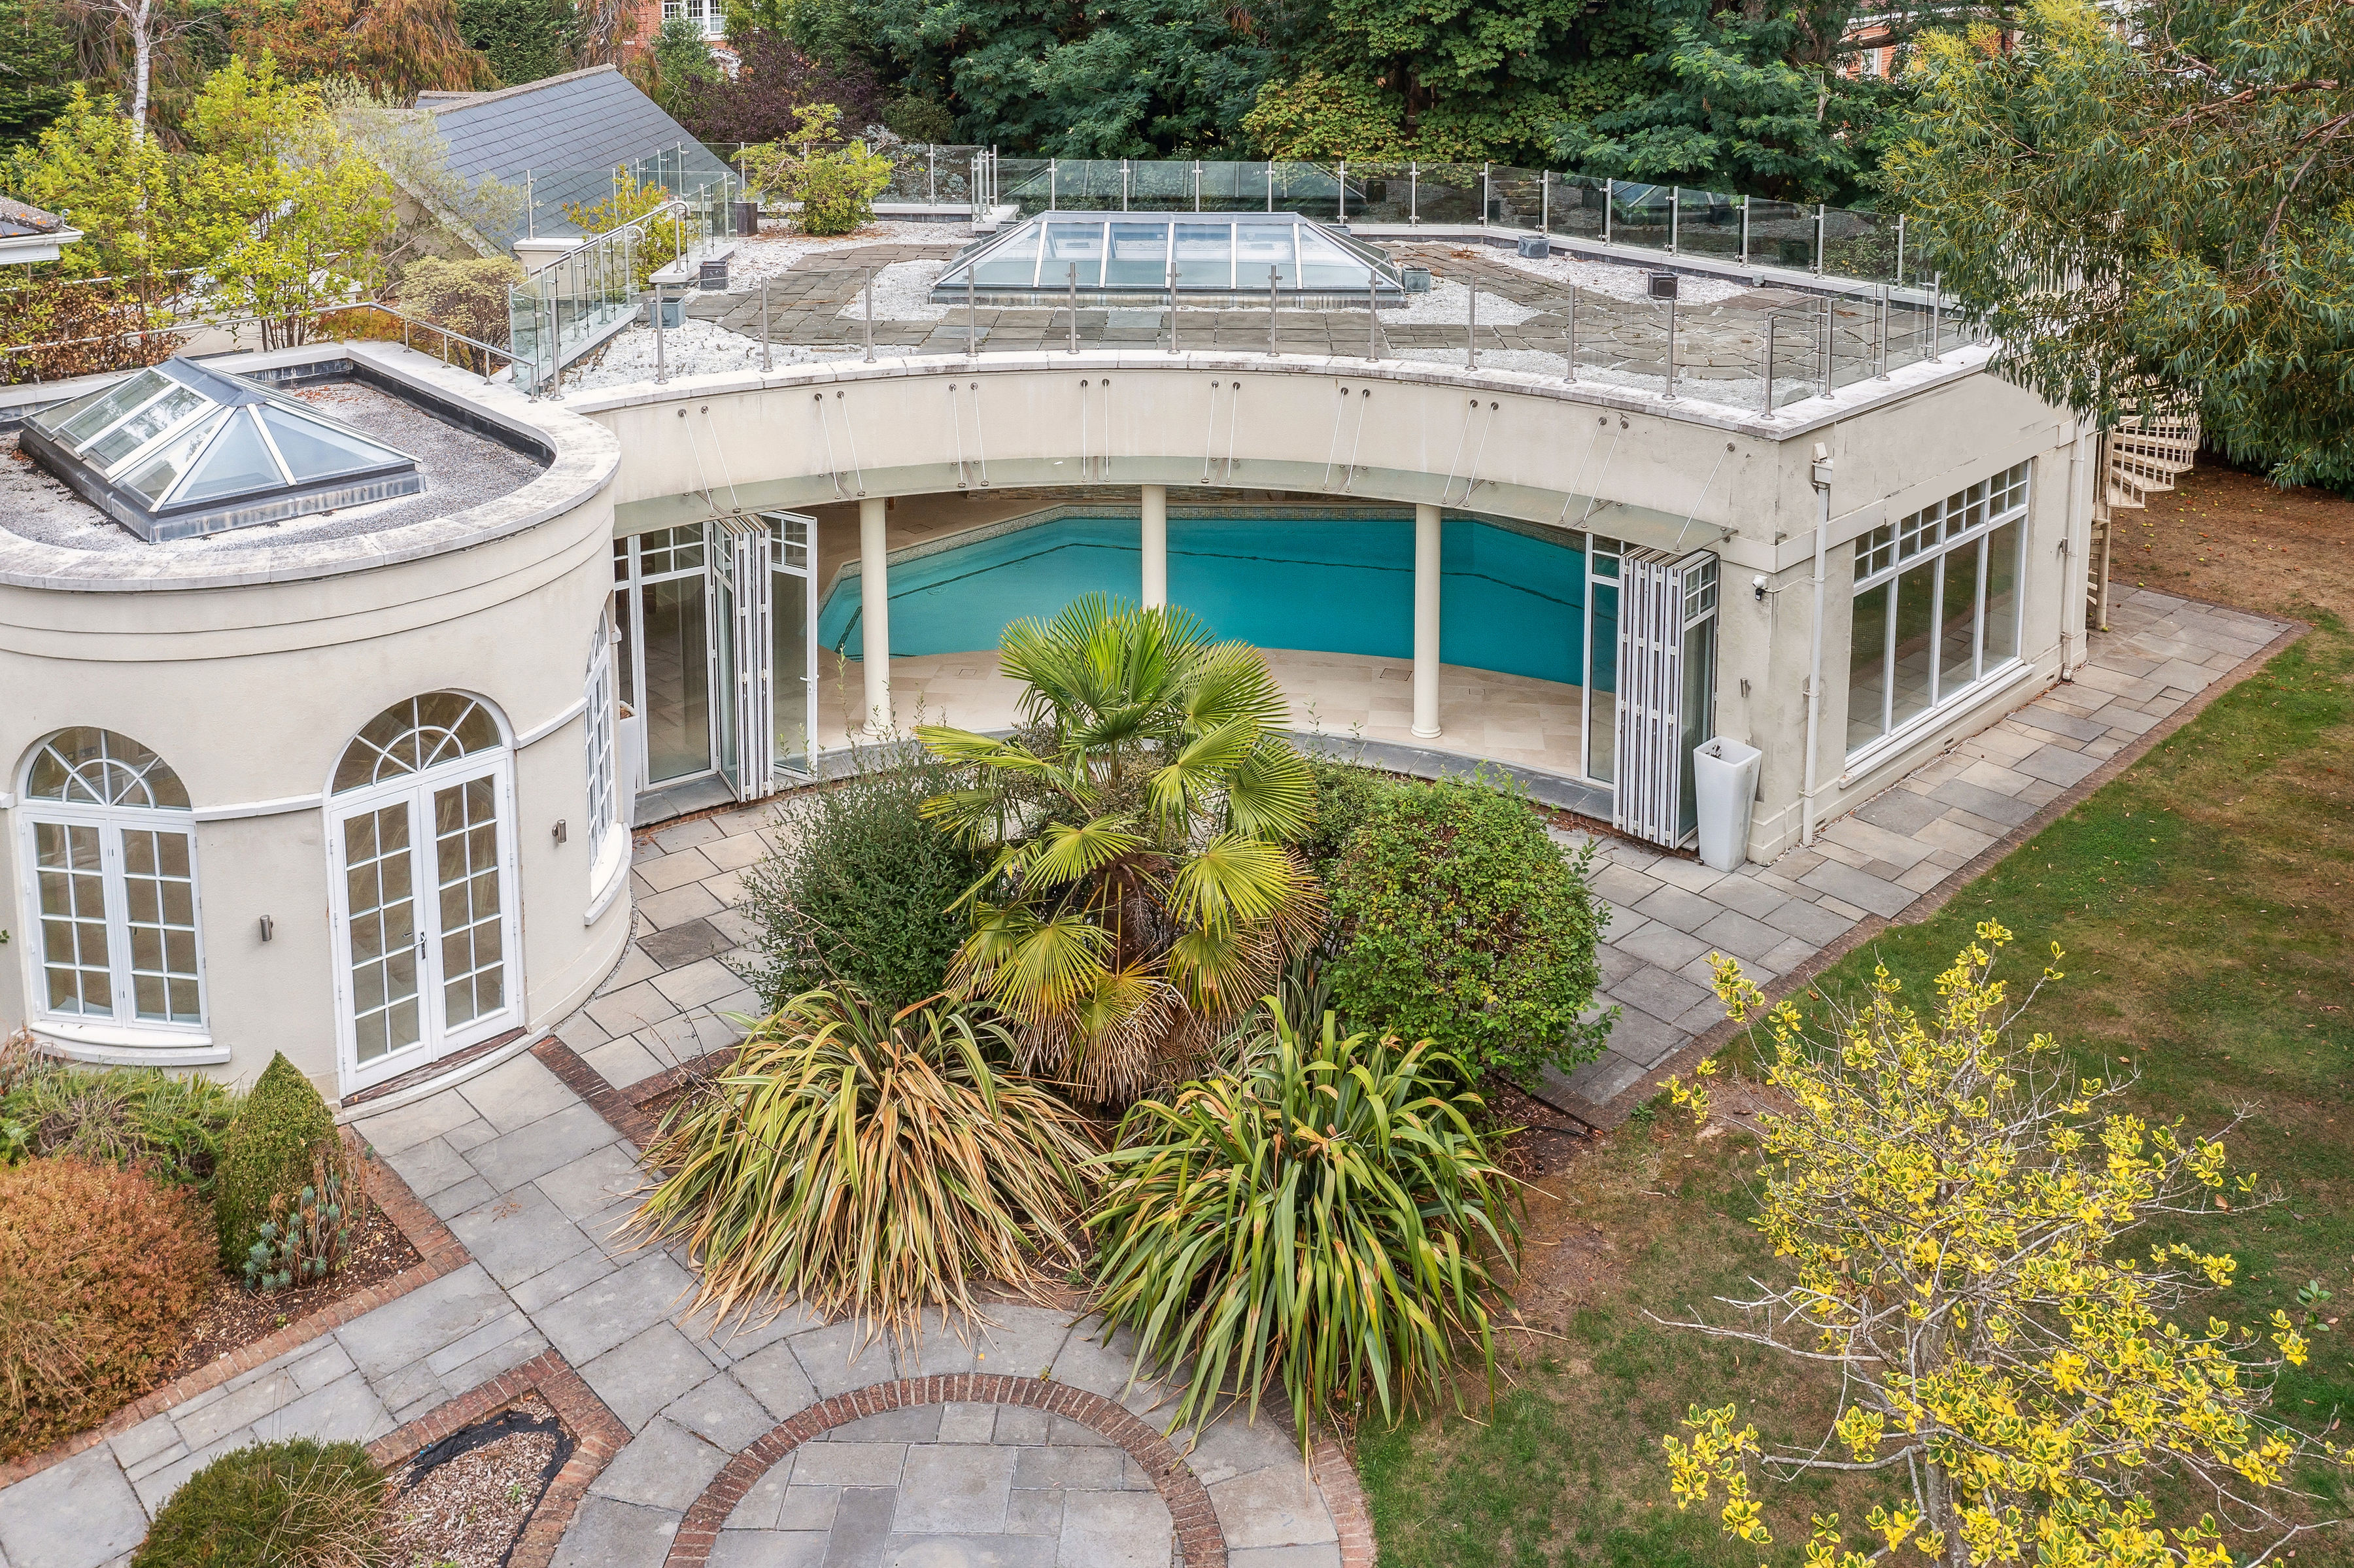 Inside didier drogbas m surrey mansion with six bedrooms and indoor pool as chelsea legend puts home up for sale the sun